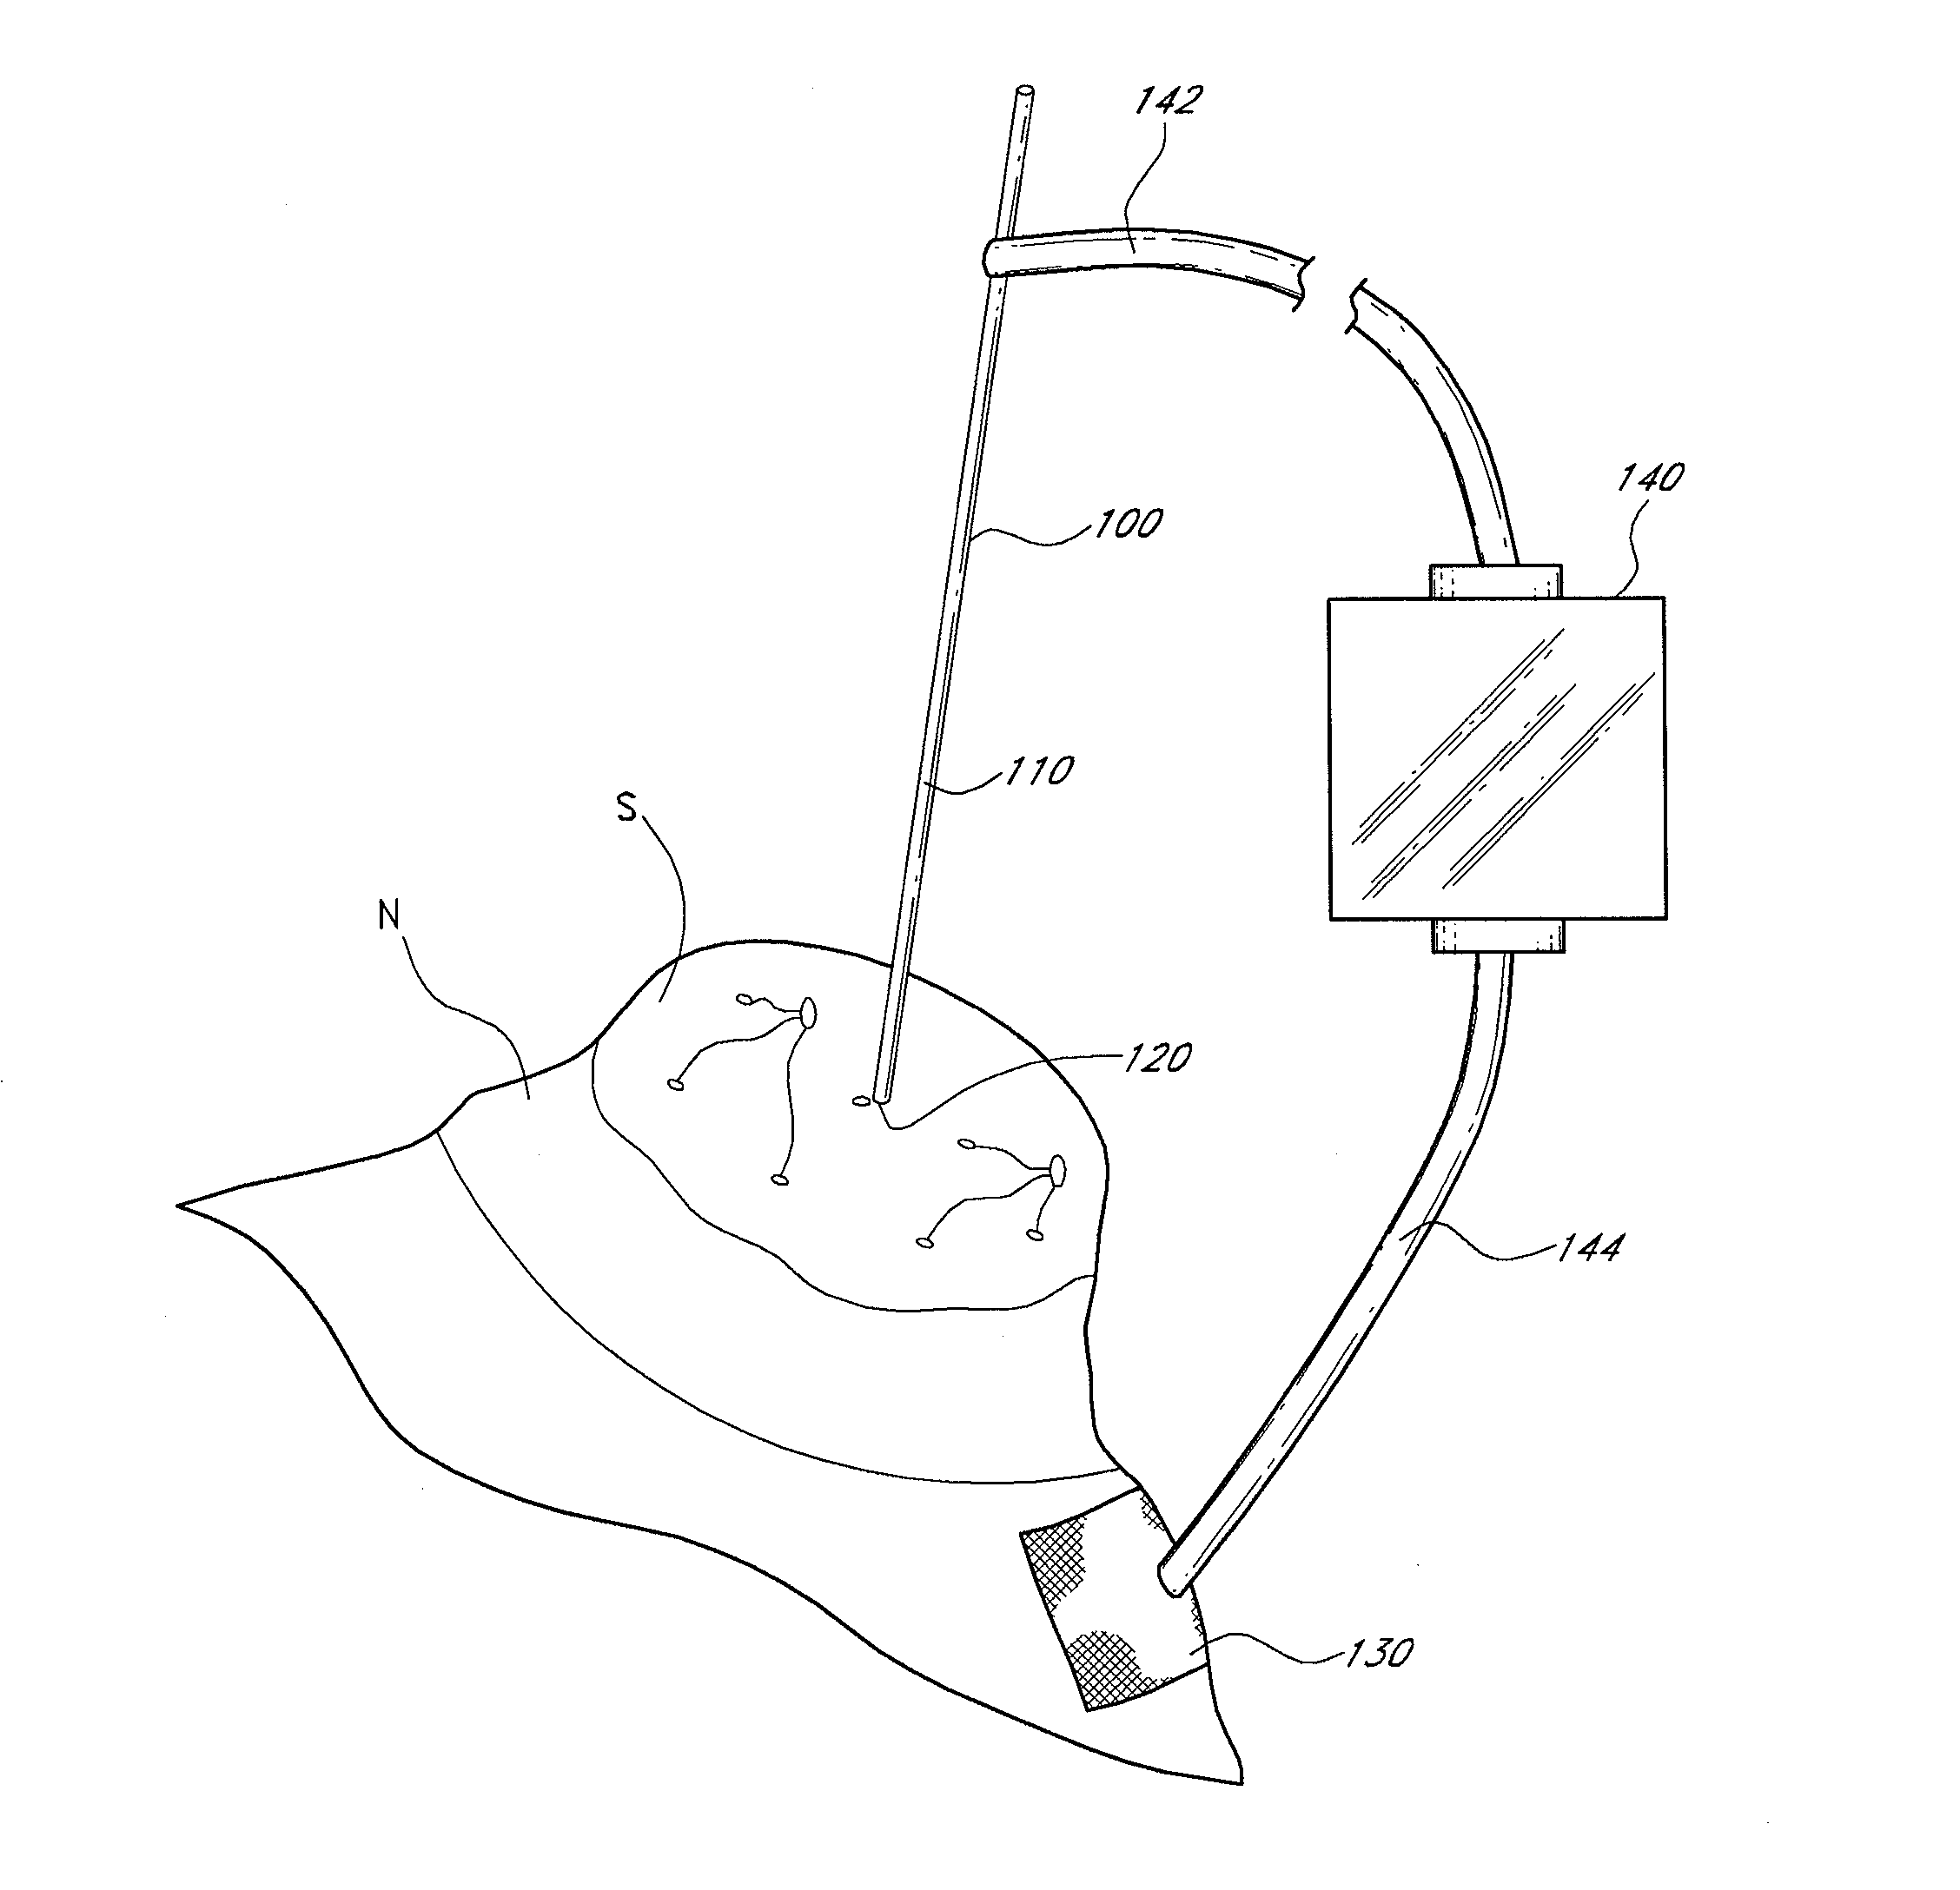 Device and method for accessing and treating ducts of mammary glands